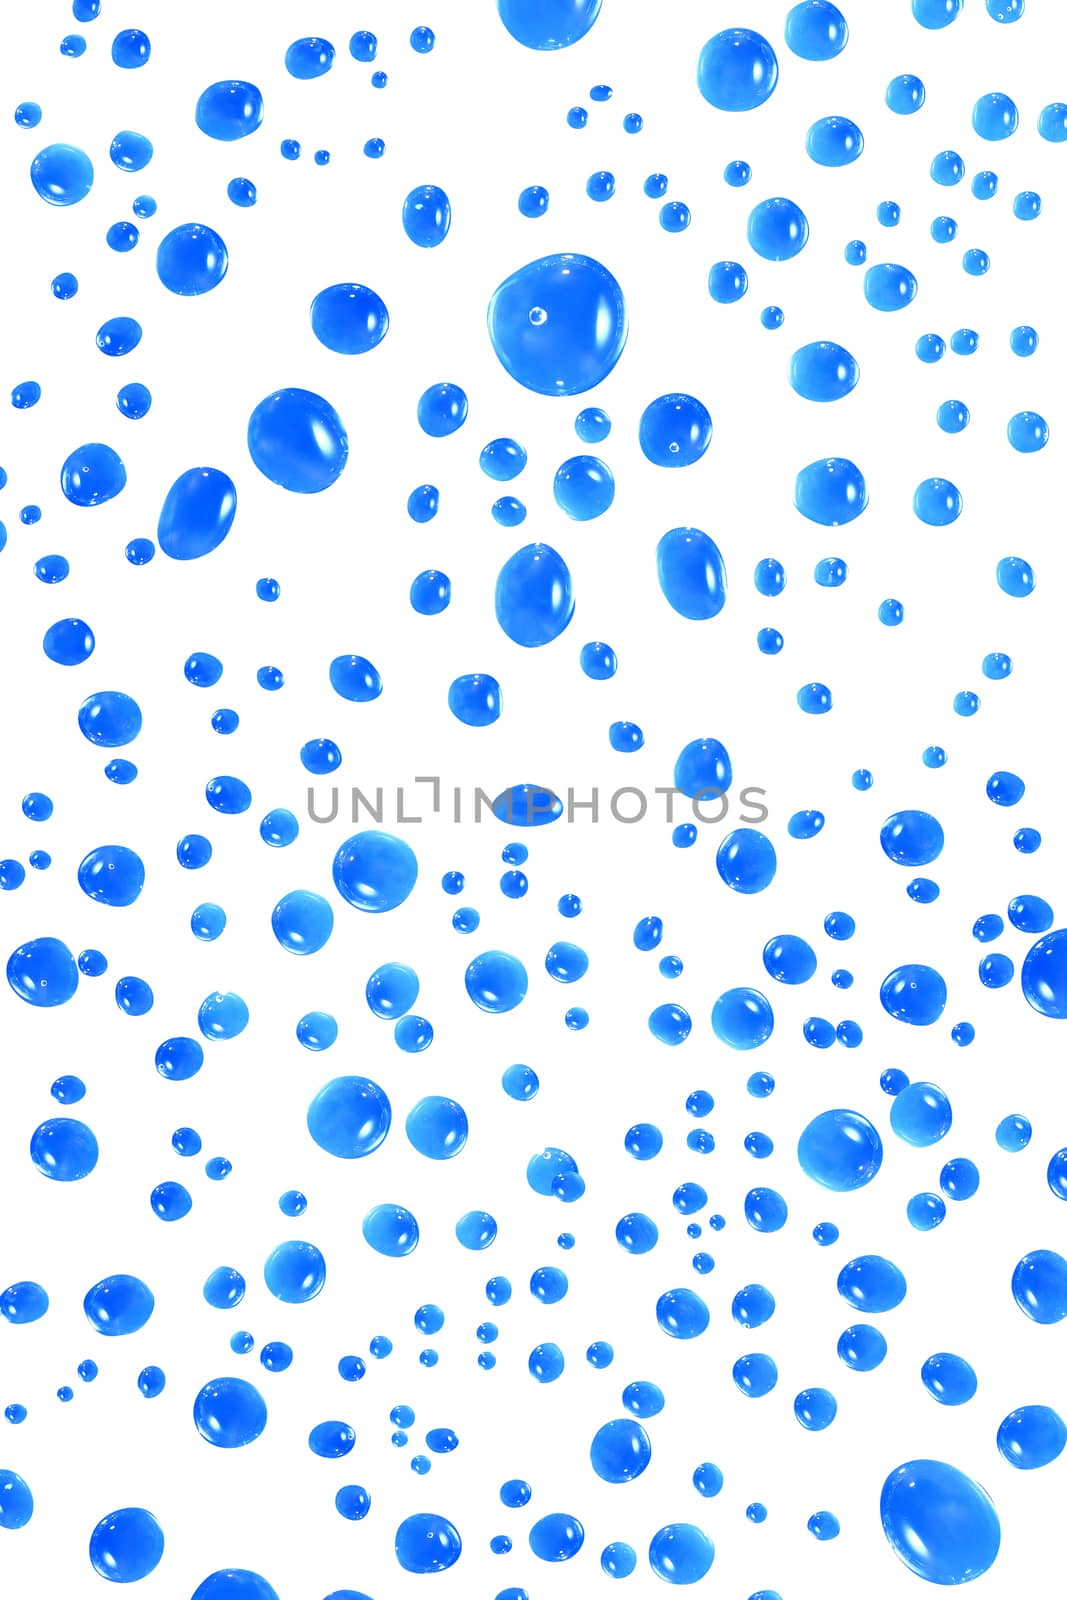 Splashes on white. Abstract blue water drops background